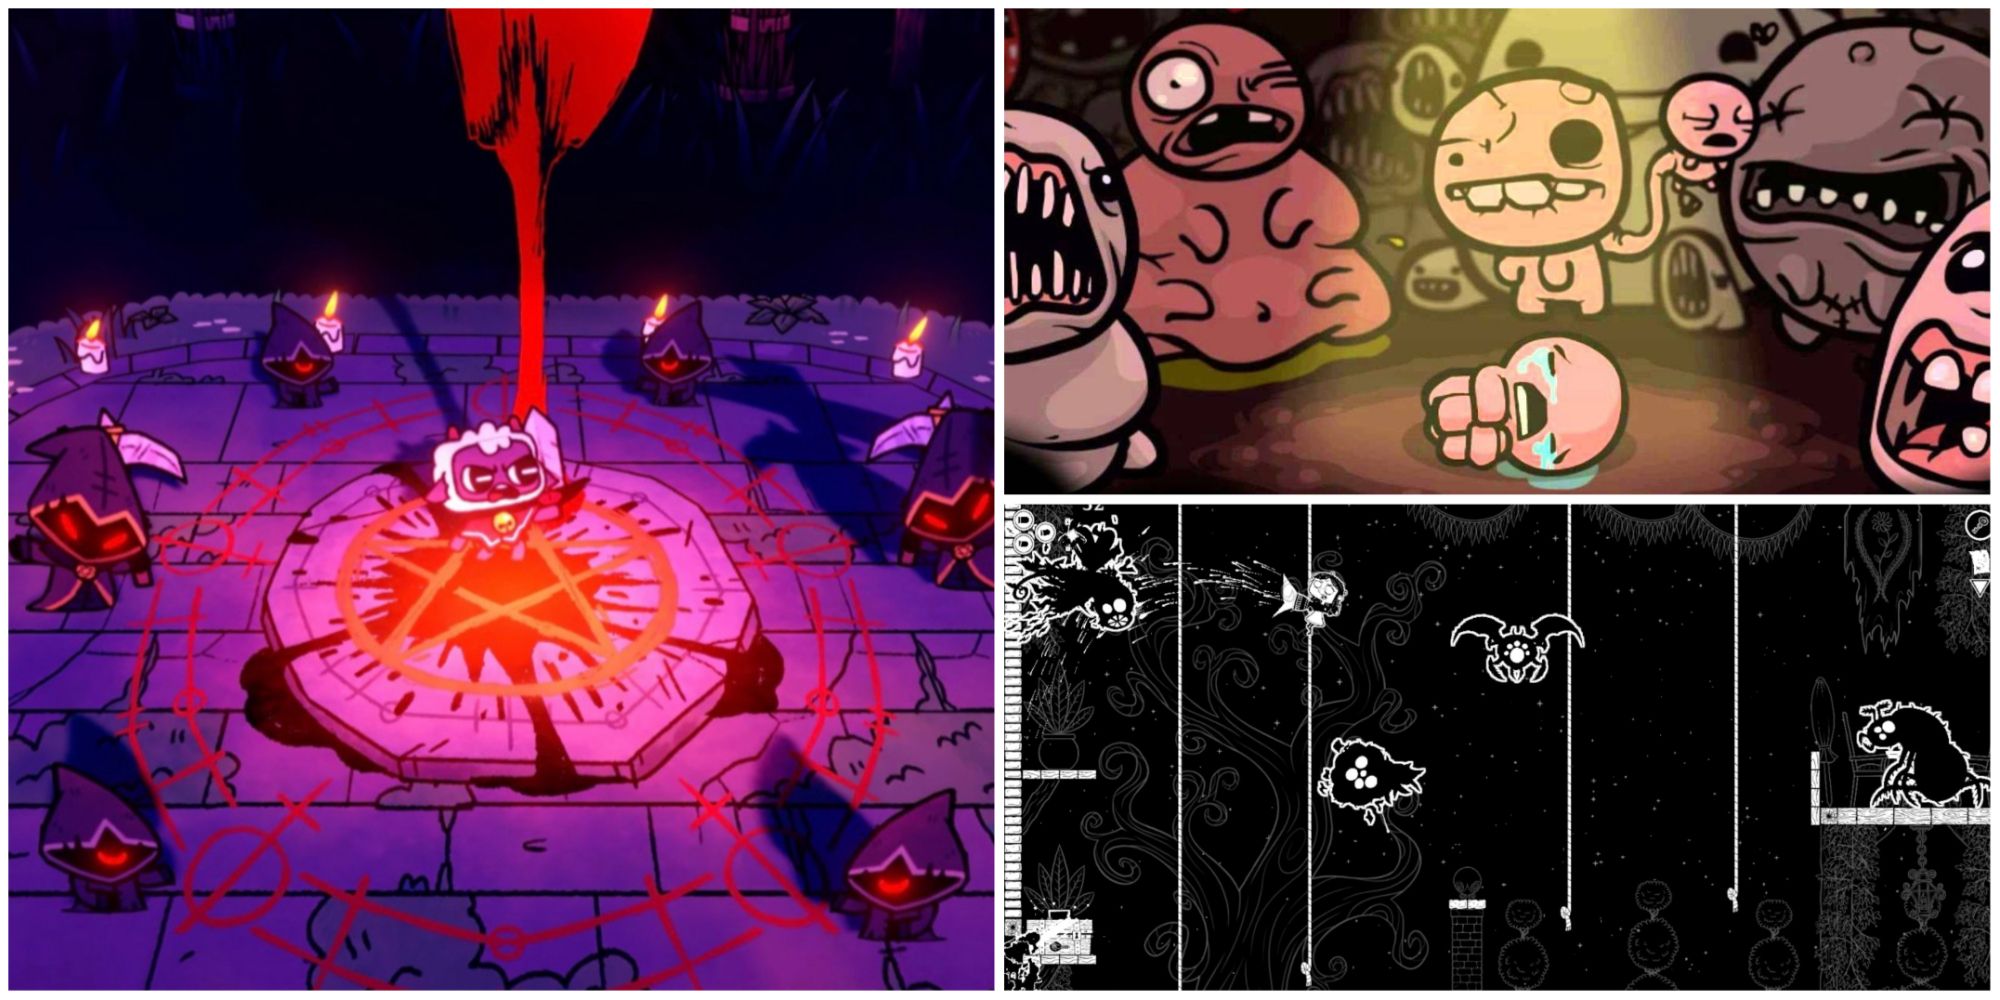 Cult of the Lamb, Binding of Isaac Rebirth, Eyes In The Dark, featured image